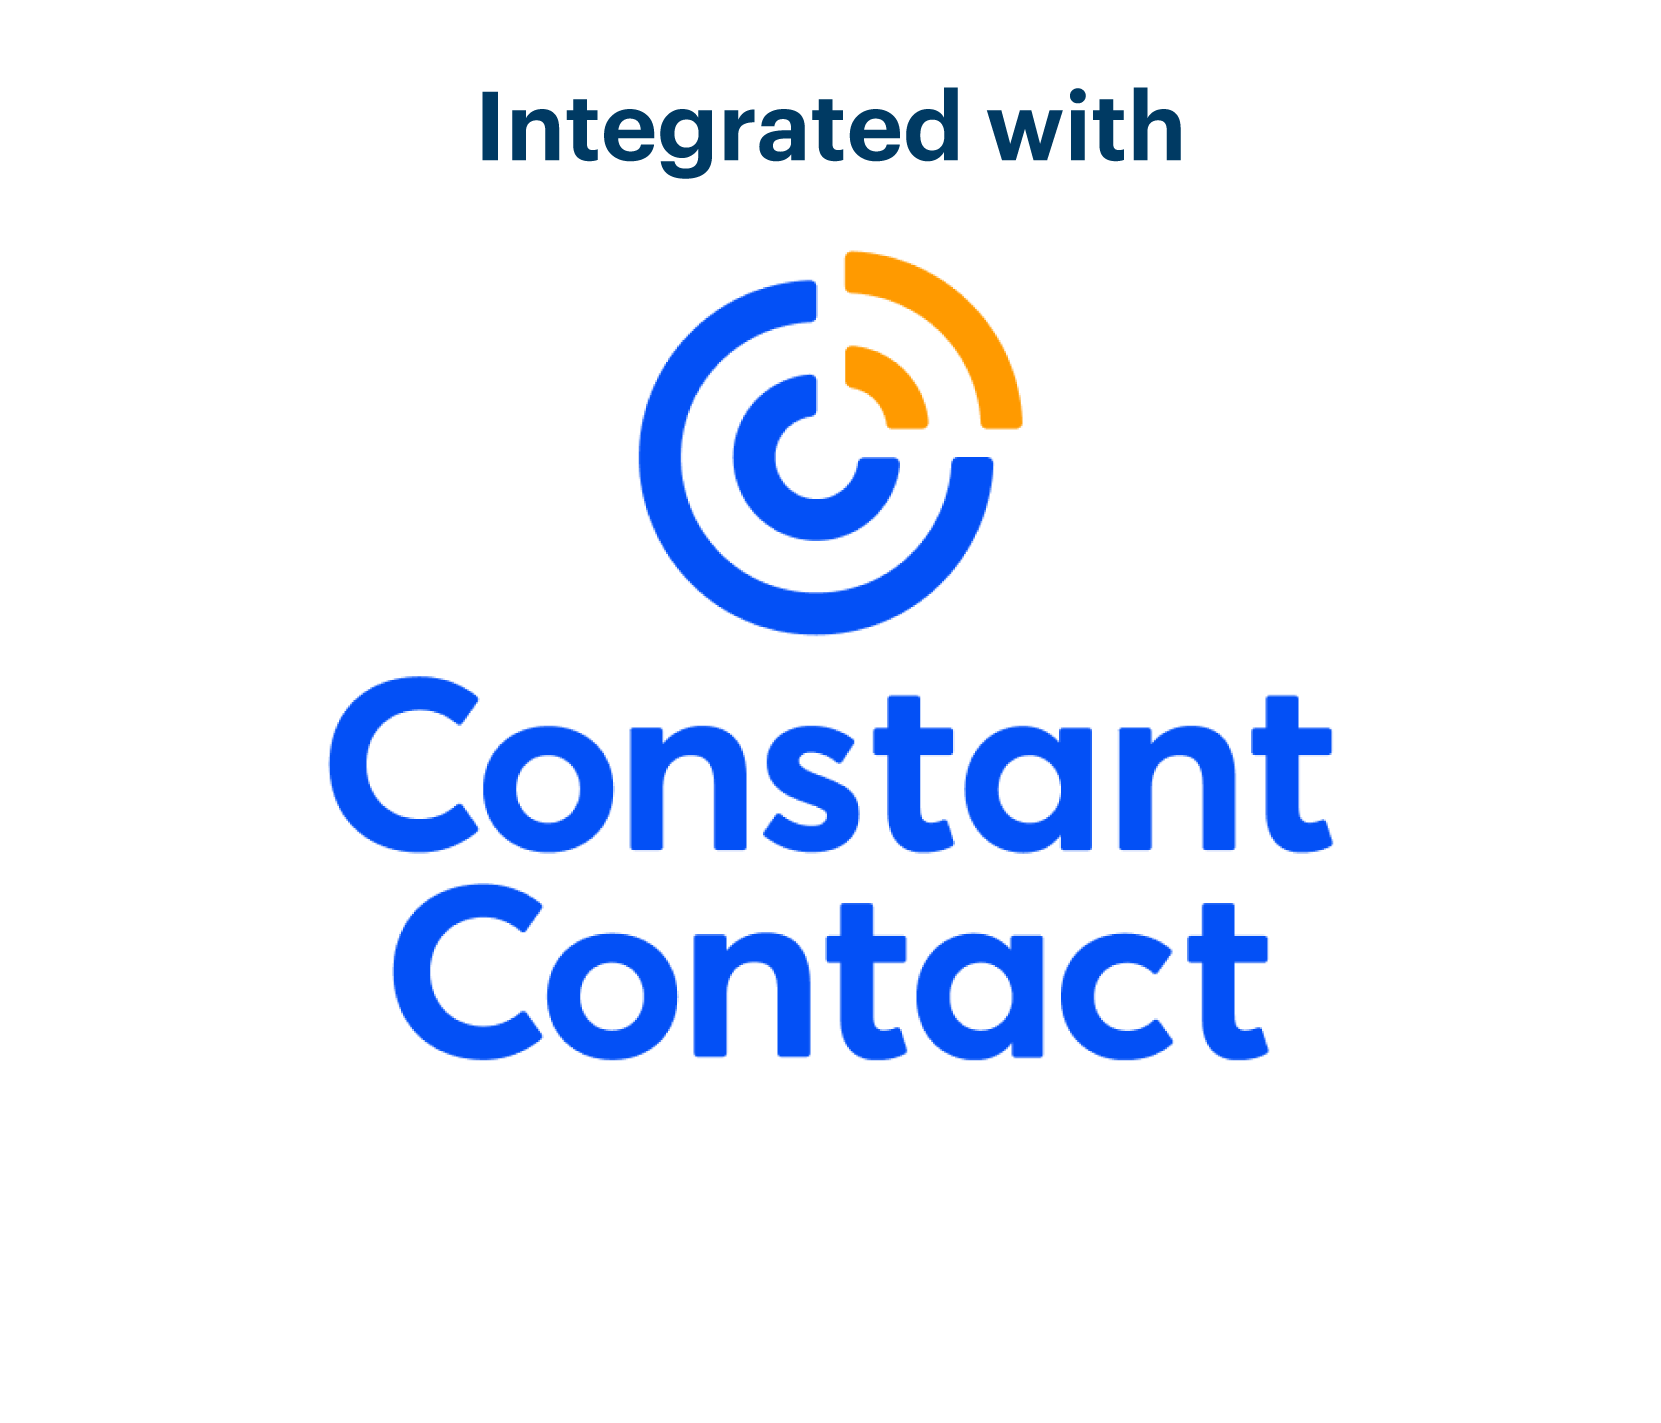 Integrated with Constant Contact